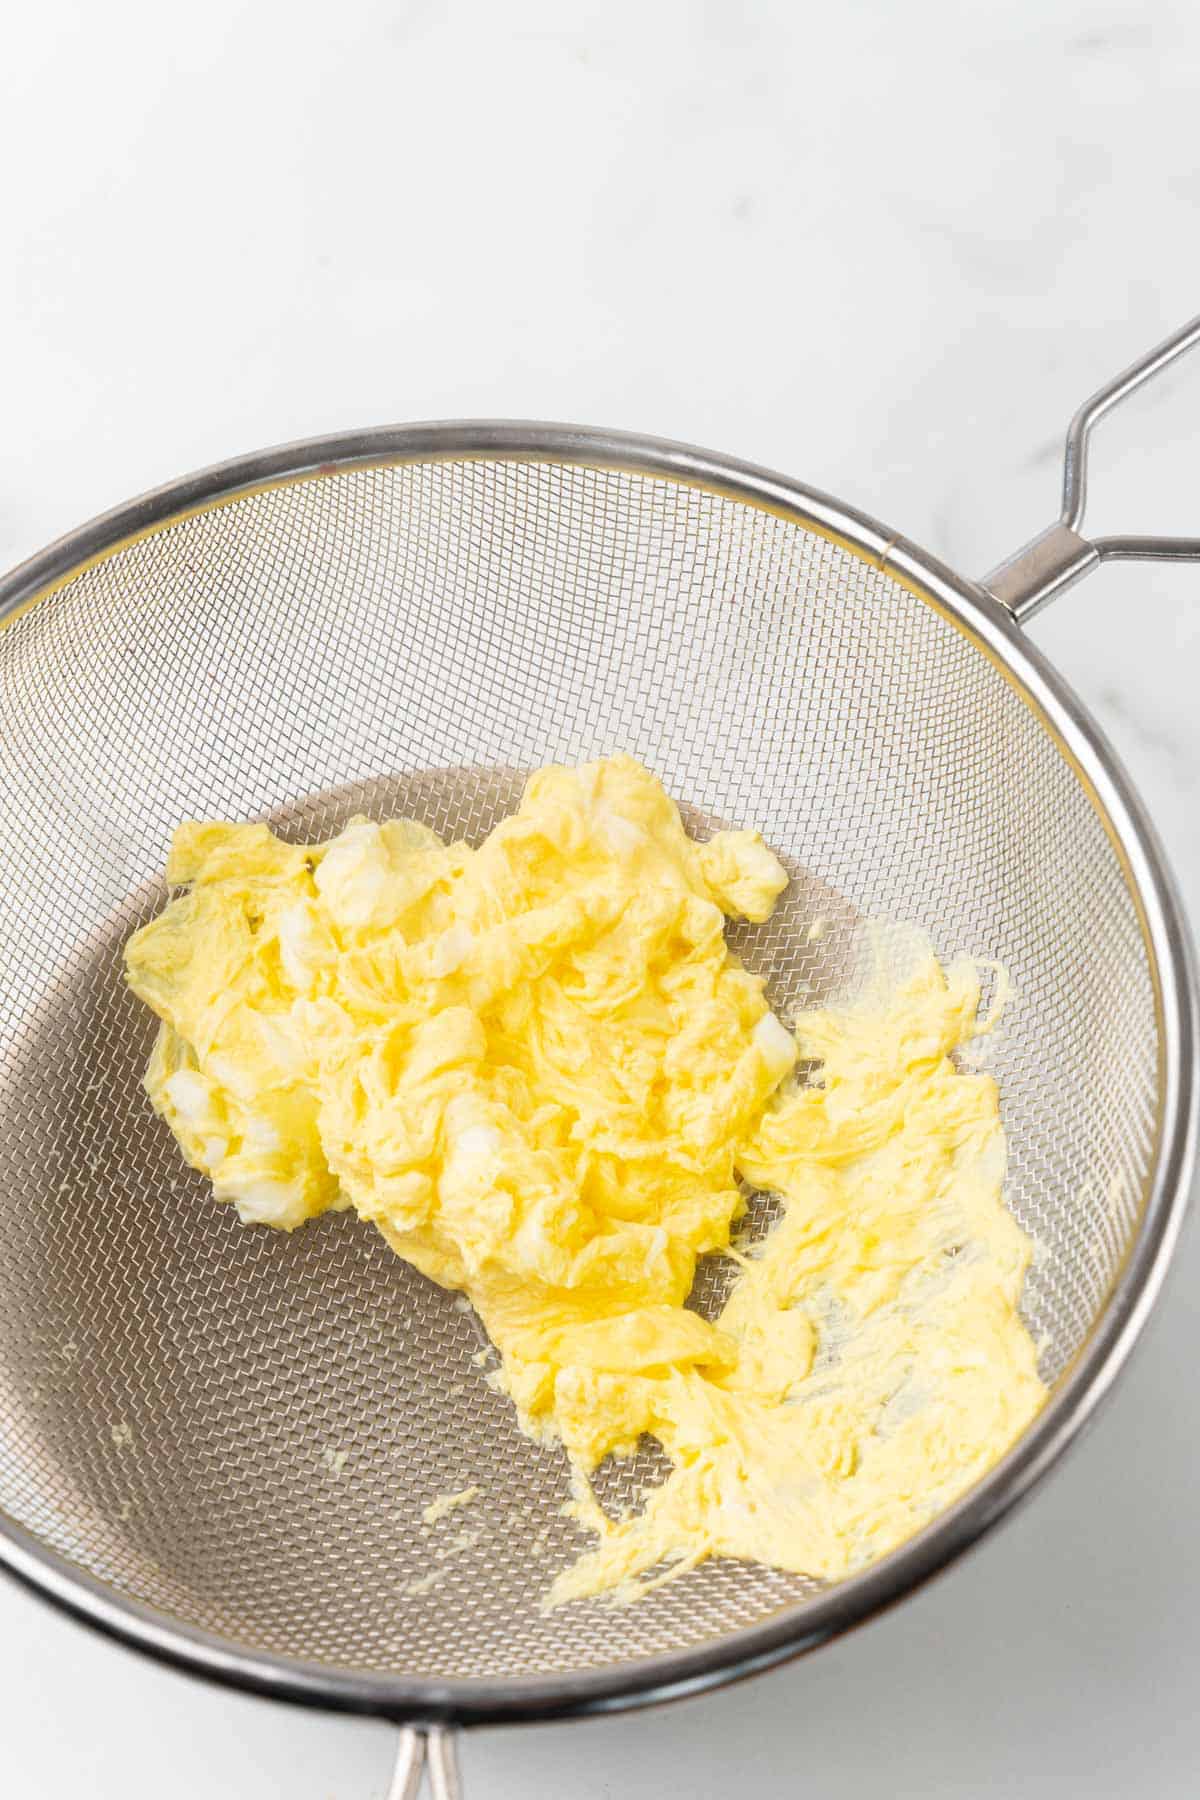 Omelet in a metal strainer over a white background